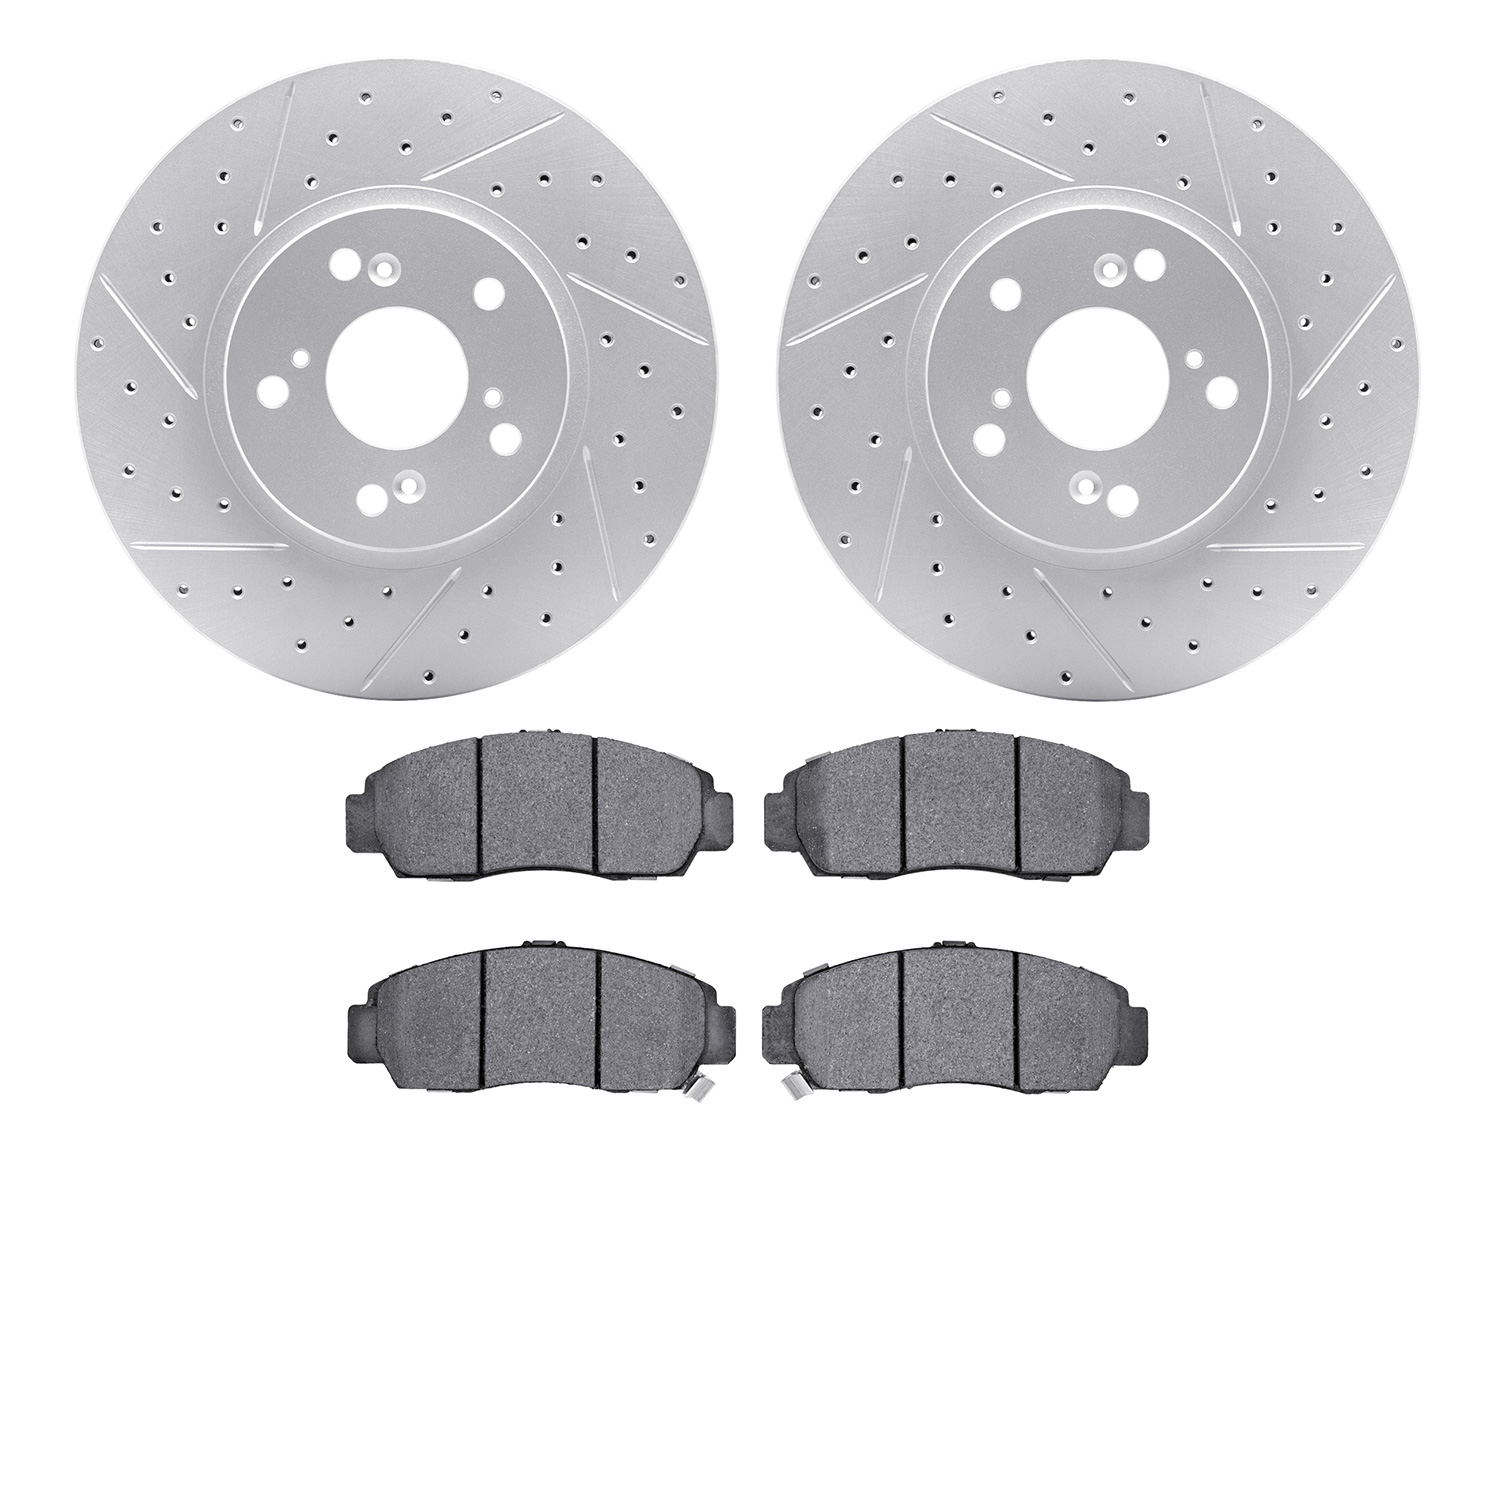 2502-59053 Geoperformance Drilled/Slotted Rotors w/5000 Advanced Brake Pads Kit, 1999-2014 Acura/Honda, Position: Front